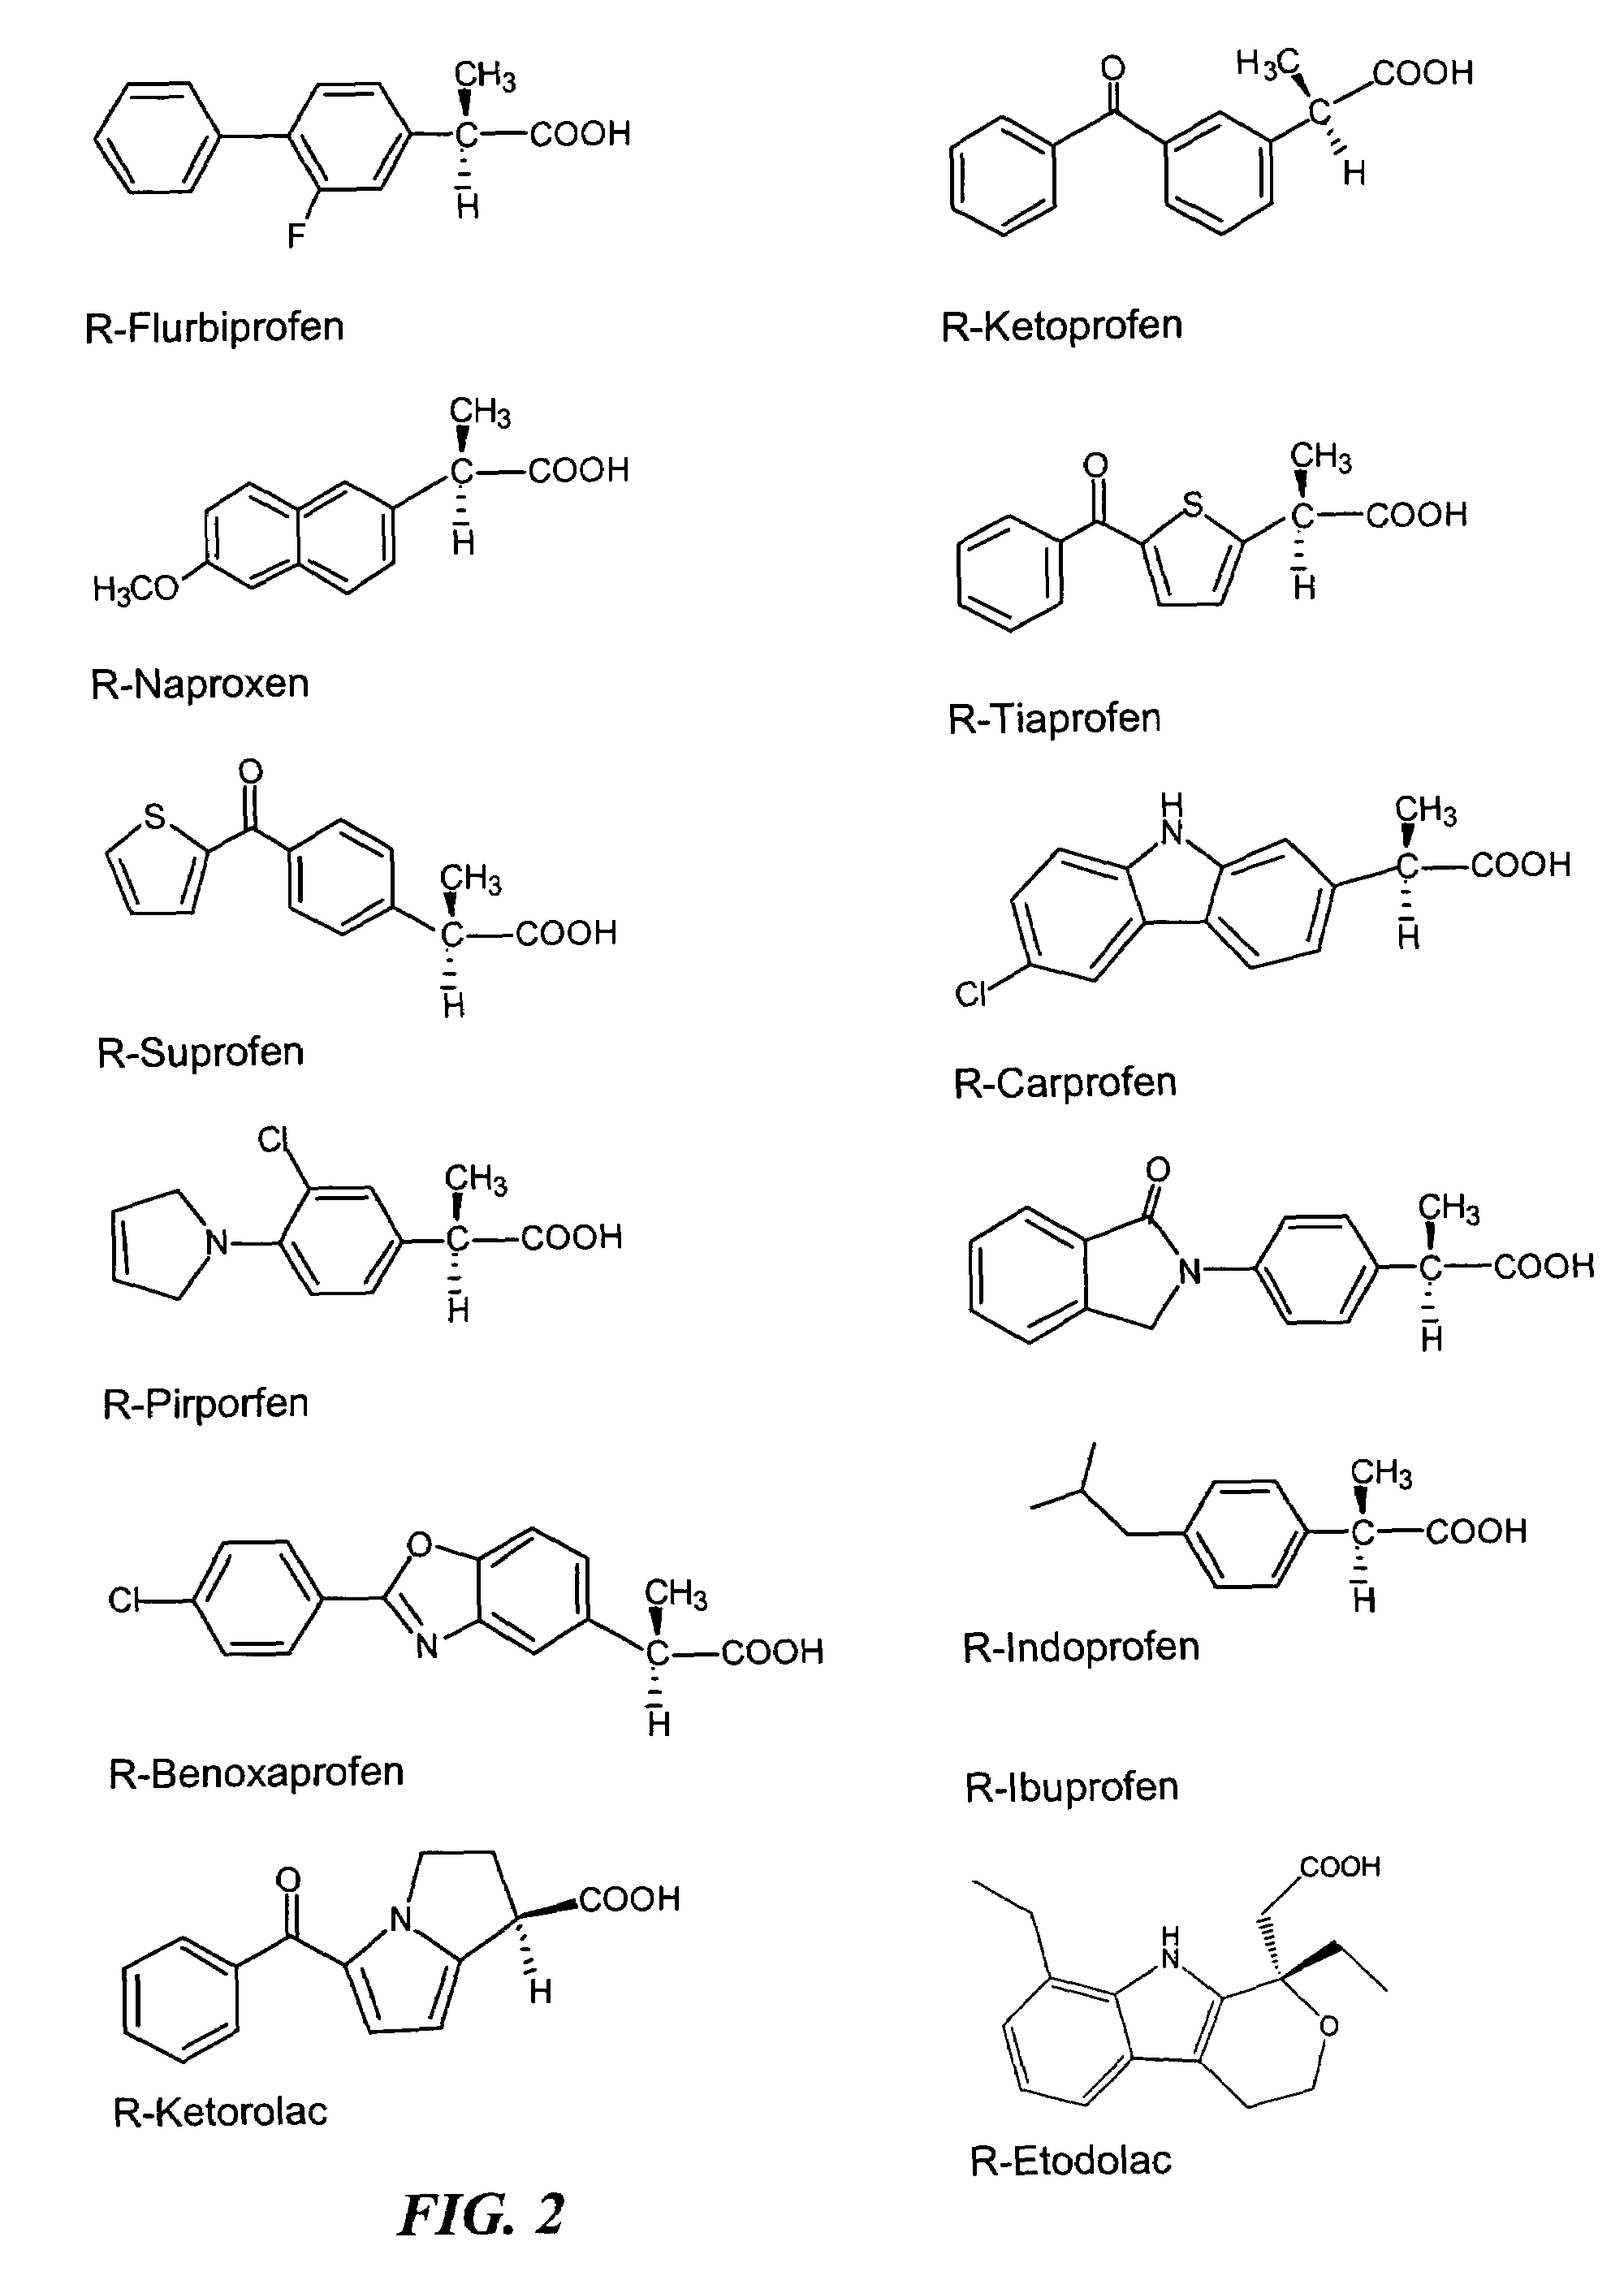 R-NSAID esters and their use